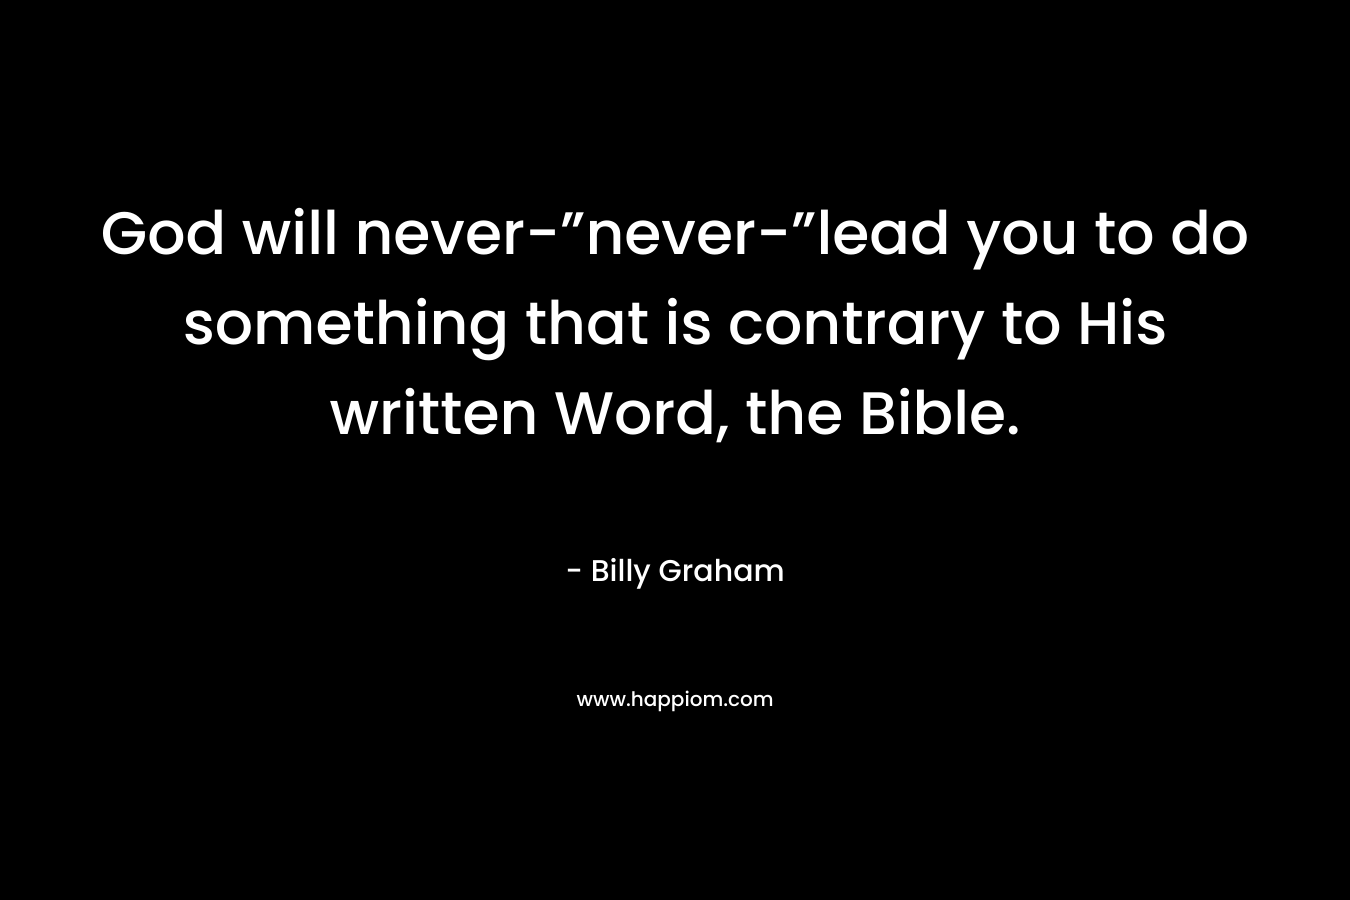 God will never-”never-”lead you to do something that is contrary to His written Word, the Bible.